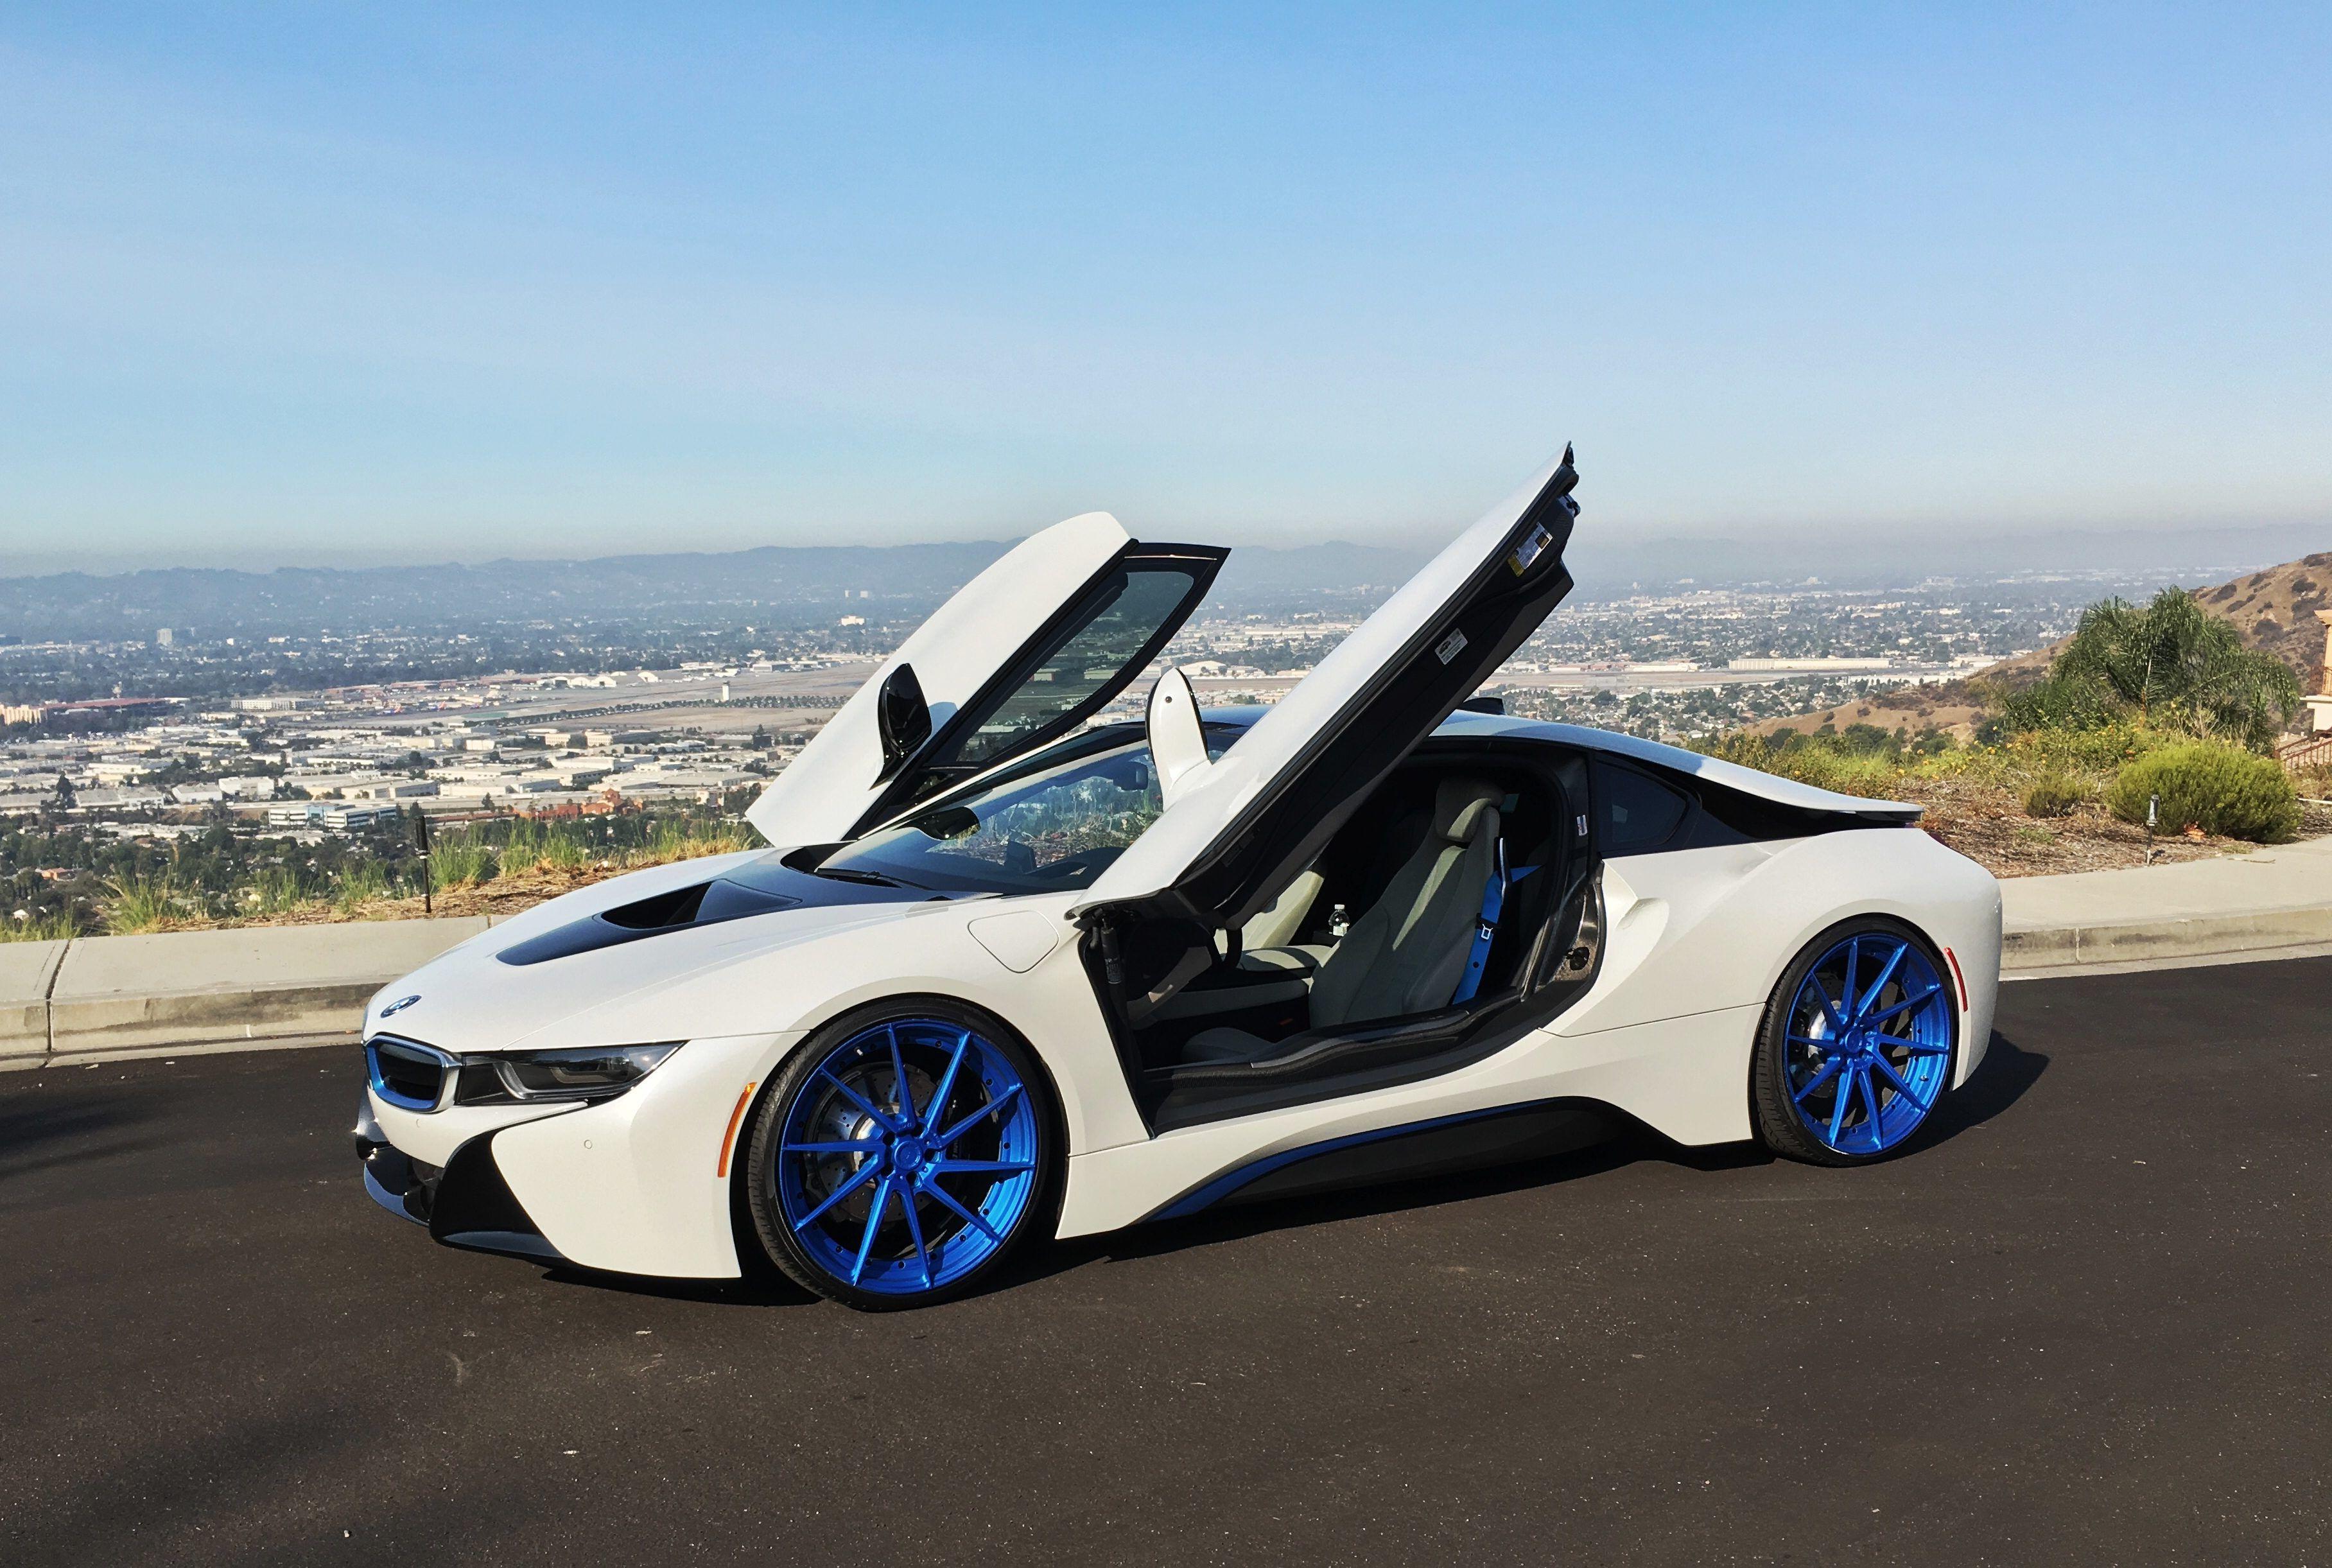 Exotic Luxury Car Logo - Rent Exotic, Luxury, and Classic Cars - Carbon Exotic Rentals